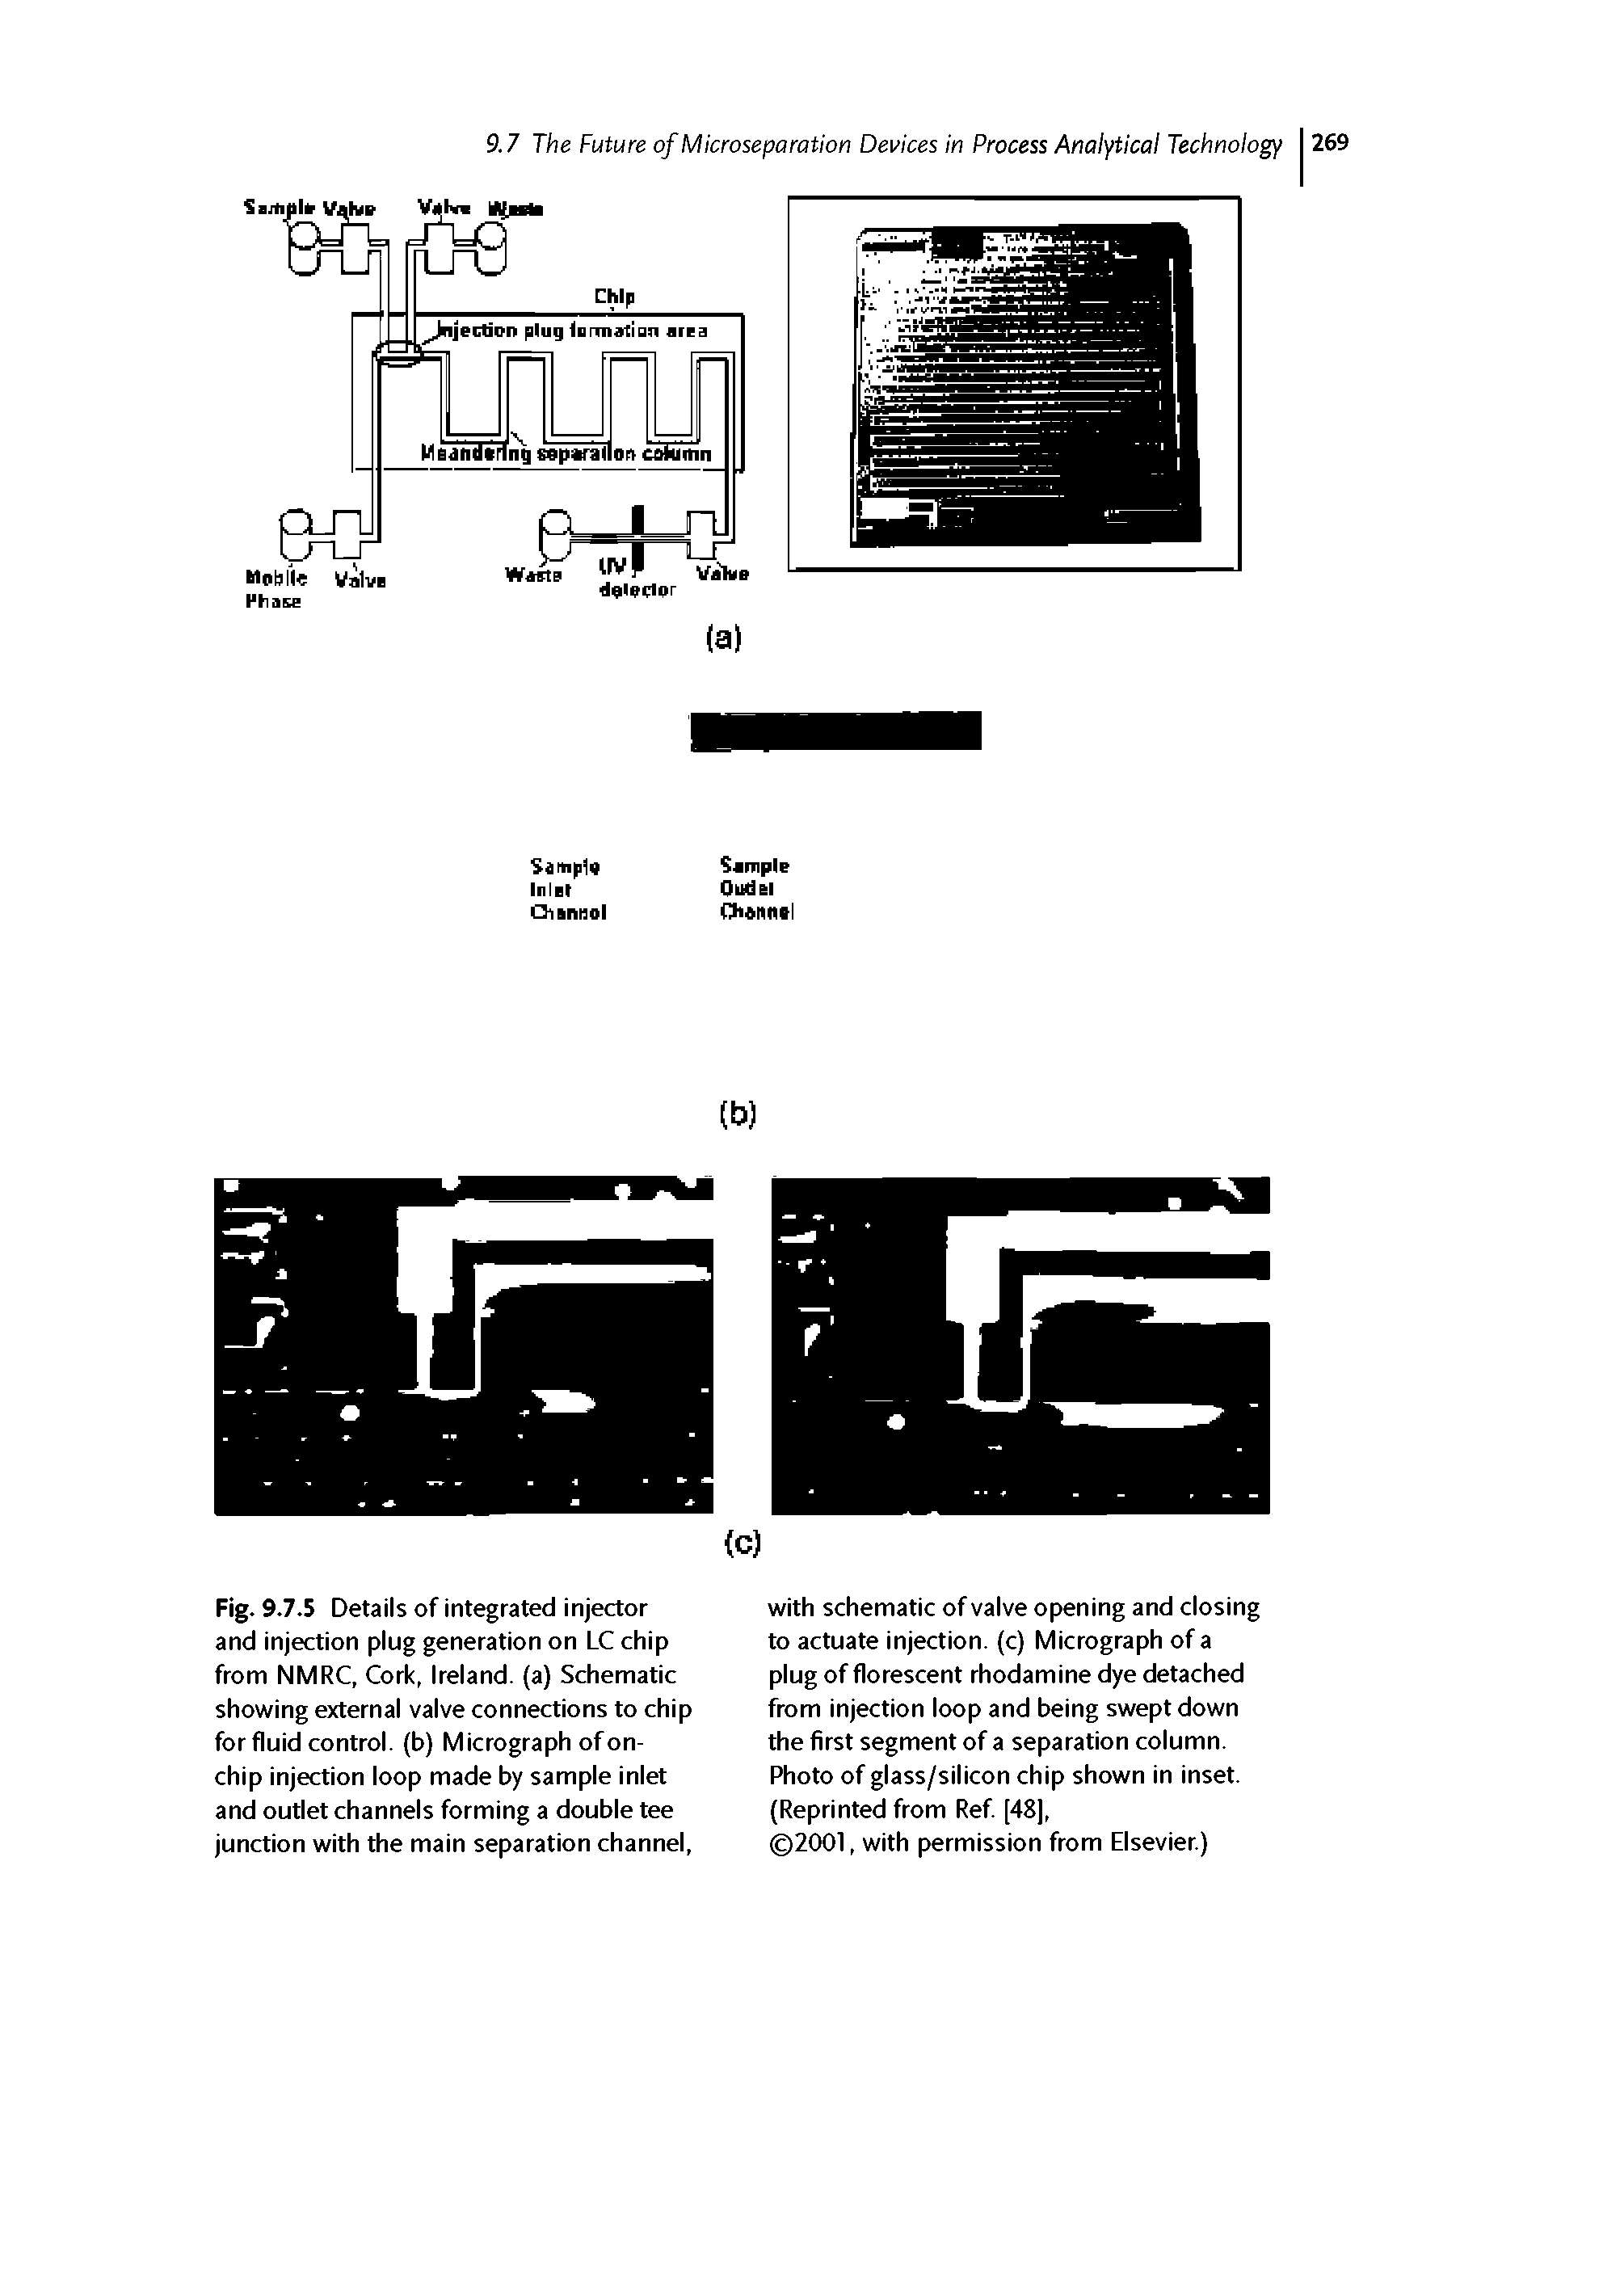 Fig. 9.7.5 Details of integrated injector and injection plug generation on LC chip from NMRC, Cork, Ireland, (a) Schematic showing external valve connections to chip for fluid control, (b) Micrograph of on-chip injection loop made by sample inlet and outlet channels forming a double tee junction with the main separation channel,...